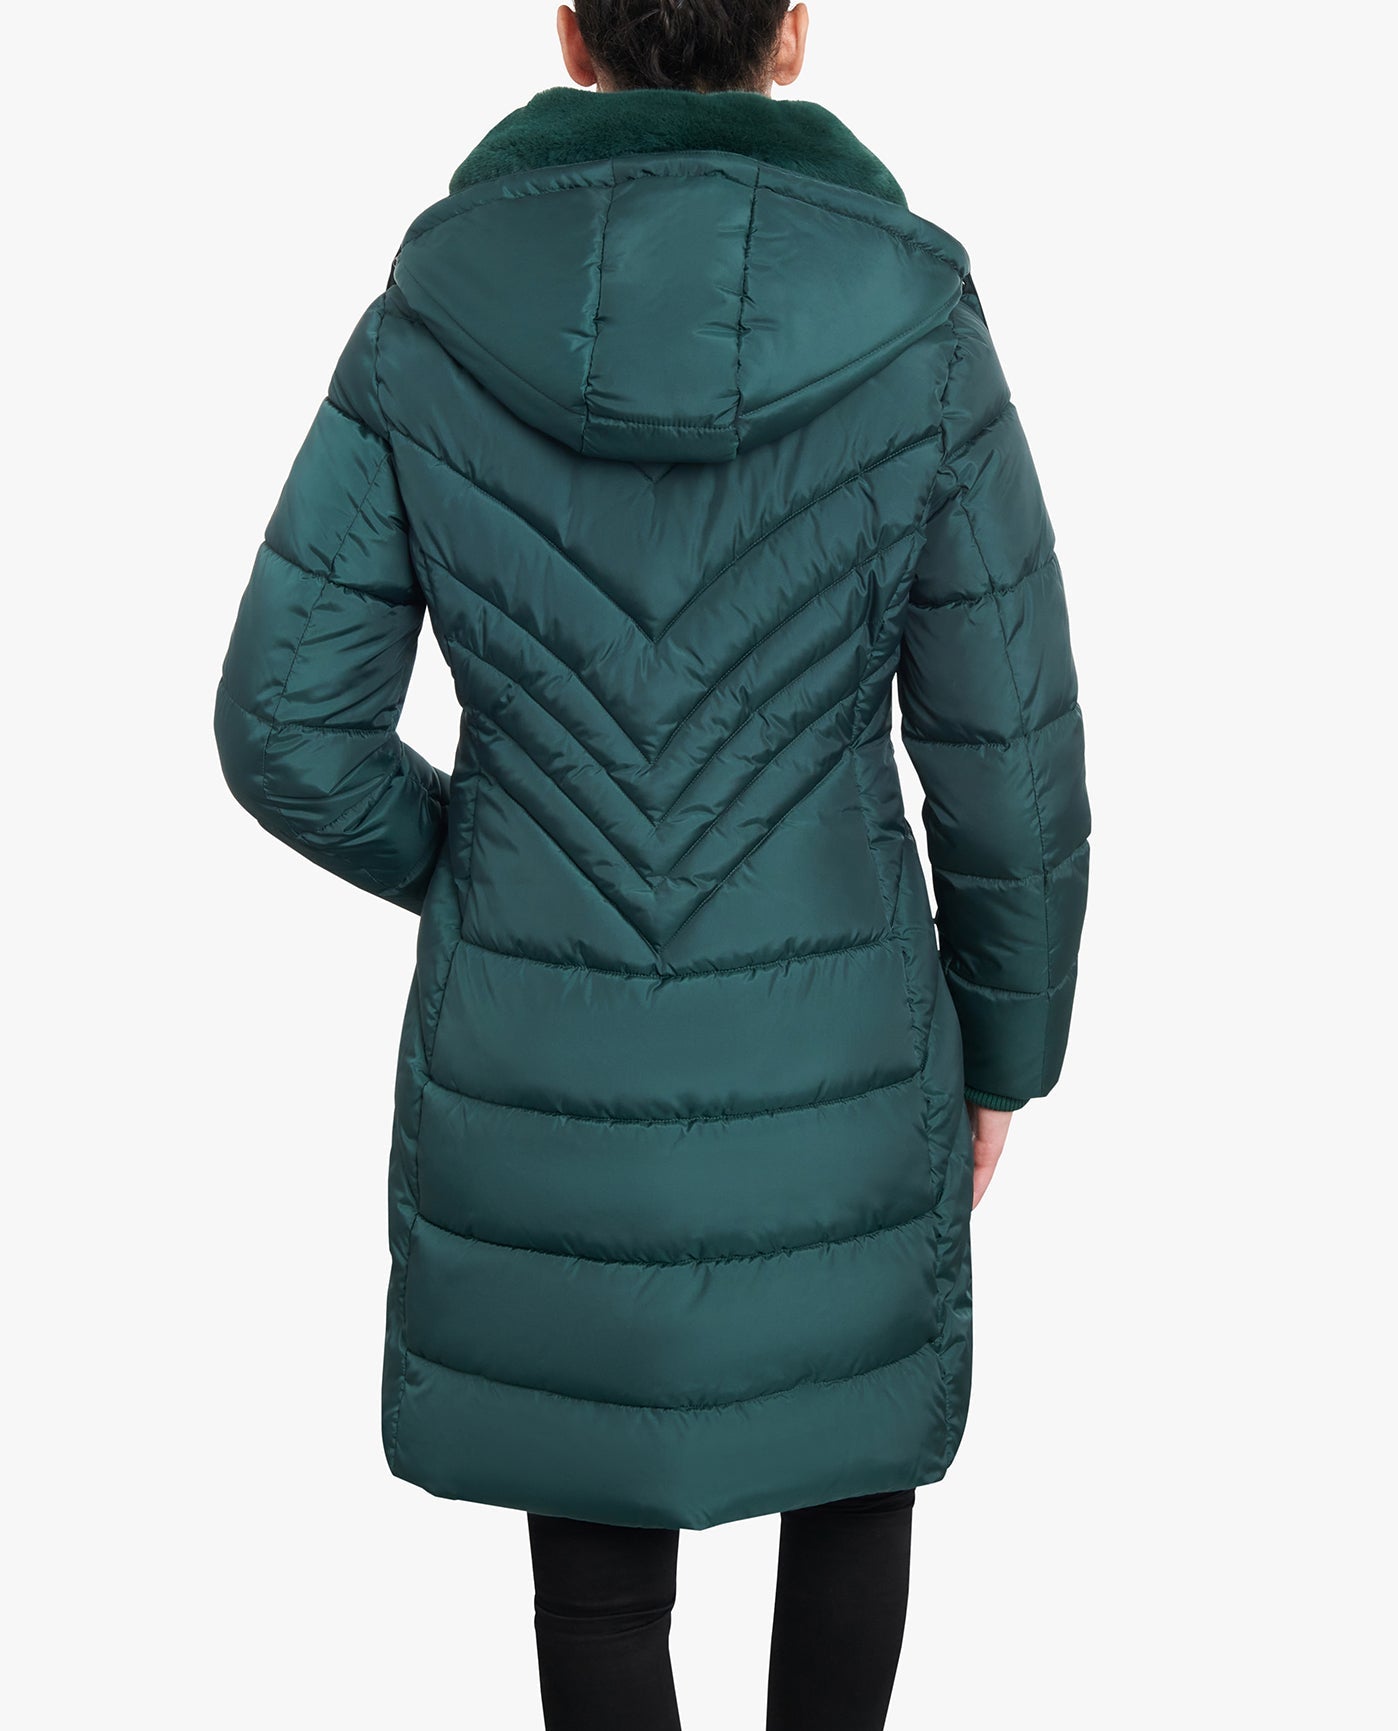 BACK VIEW OF ZIP-FRONT HOODED HEAVY WEIGHT PUFFER JACKET WITH BUTTON-OFF FUR COLLAR | GREEN